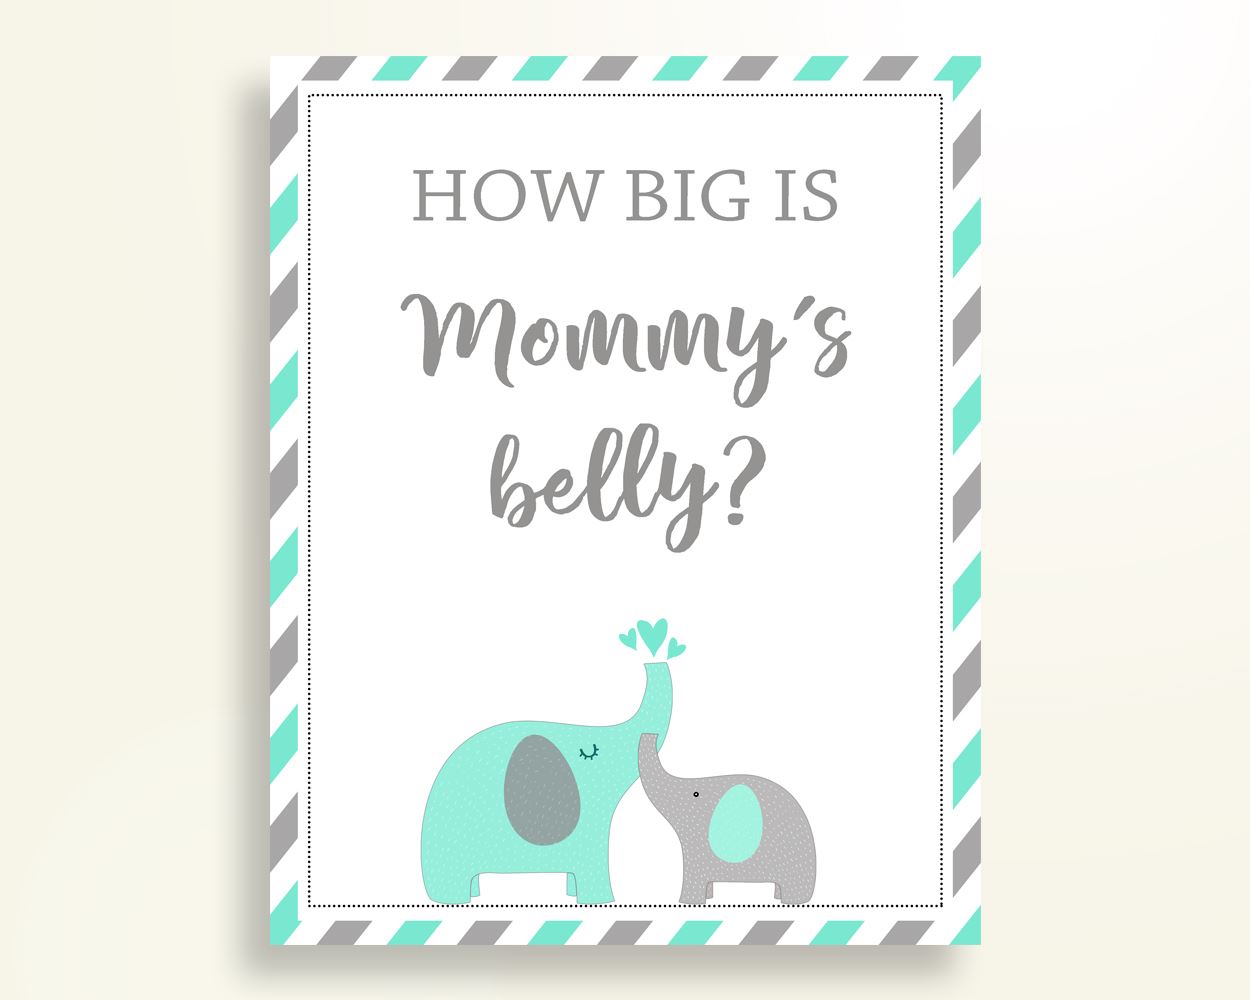 Mommy's Belly Baby Shower Mommy's Belly Turquoise Baby Shower Mommy's Belly Baby Shower Elephant Mommy's Belly Green Gray party plan 5DMNH - Digital Product